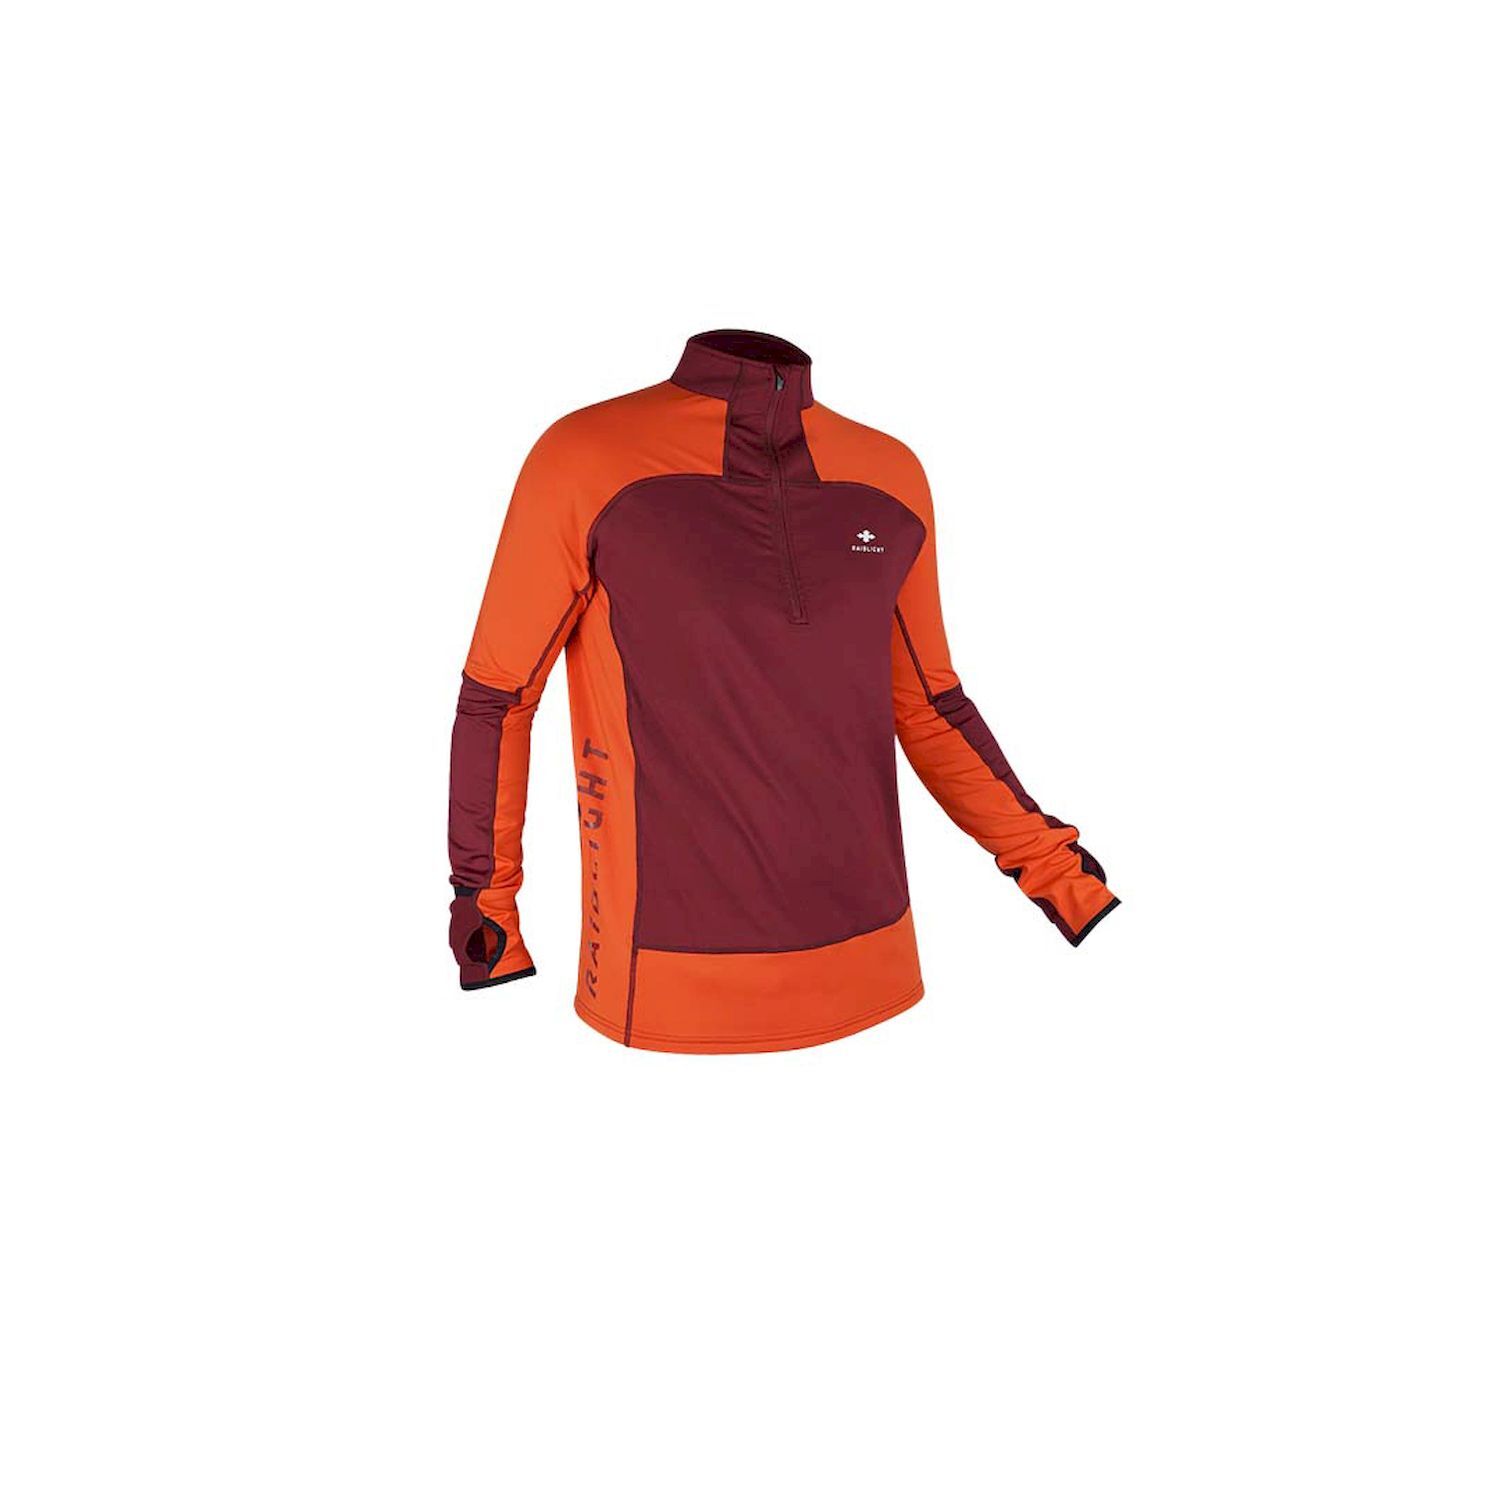 Raidlight Wintertrail LS Top - Giacca in pile - Uomo